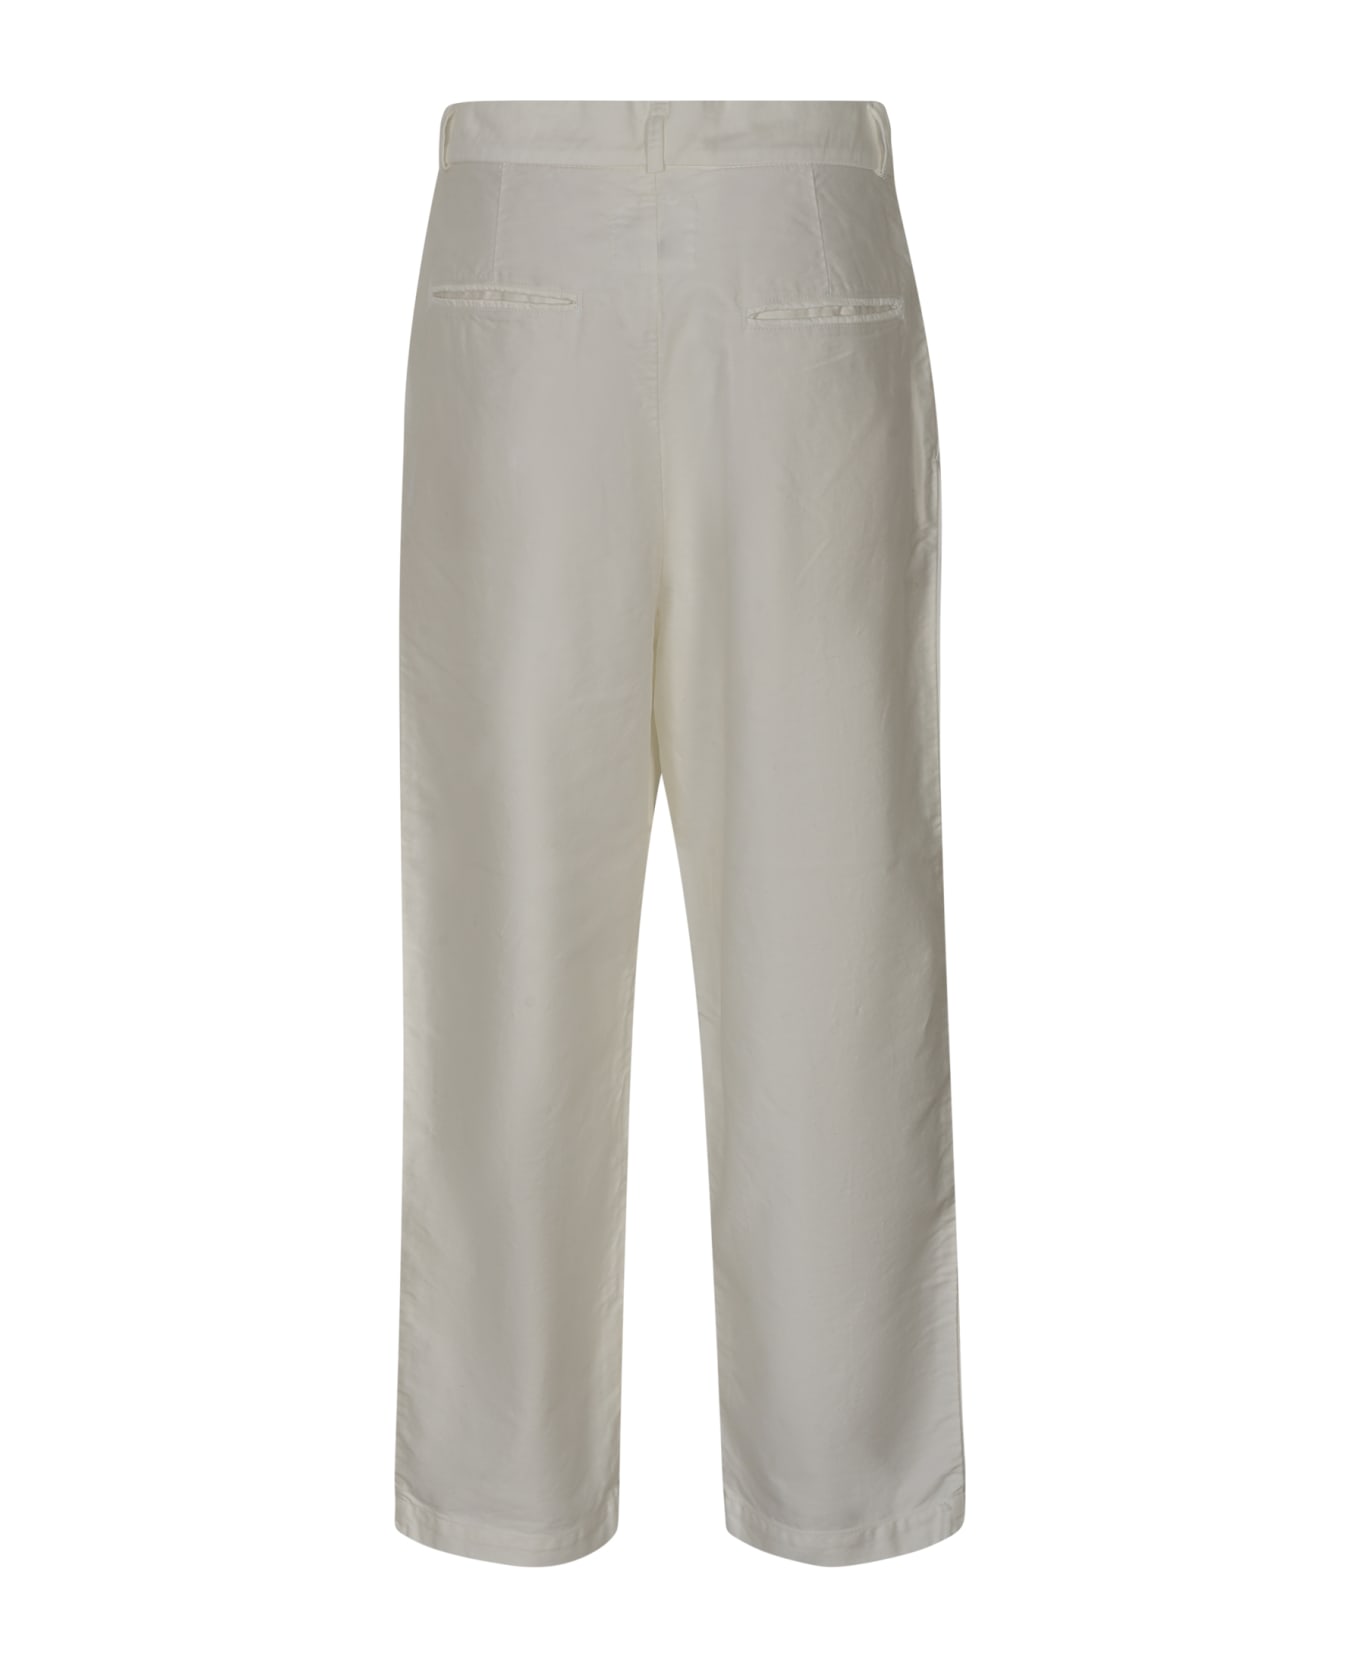 Mythinks Straight Buttoned Trousers - Ivory ボトムス